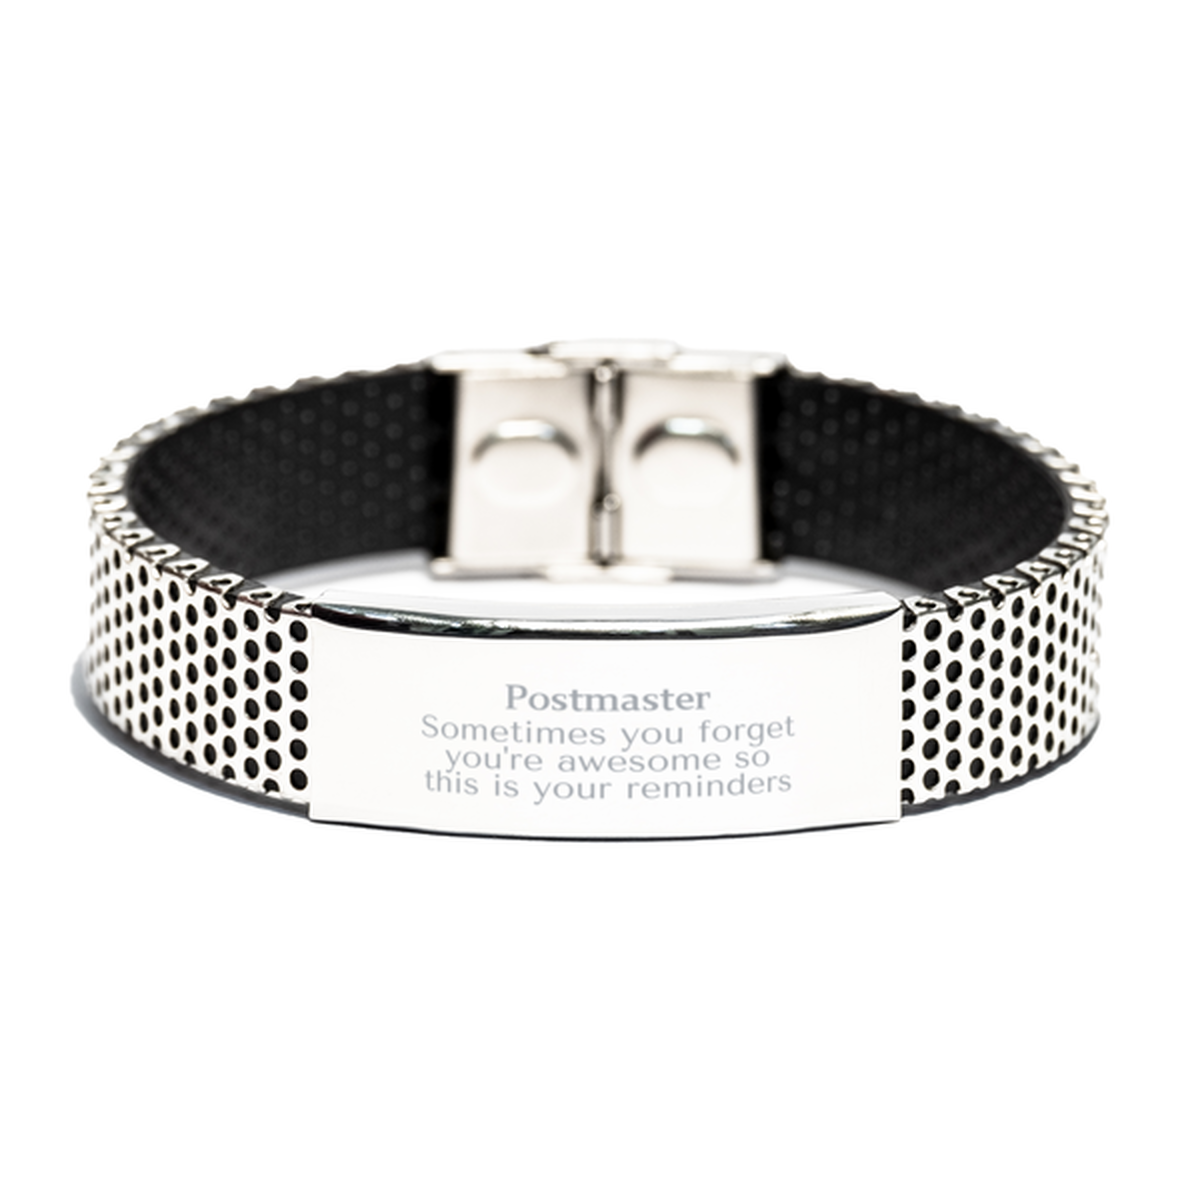 Sentimental Postmaster Stainless Steel Bracelet, Postmaster Sometimes you forget you're awesome so this is your reminders, Graduation Christmas Birthday Gifts for Postmaster, Men, Women, Coworkers